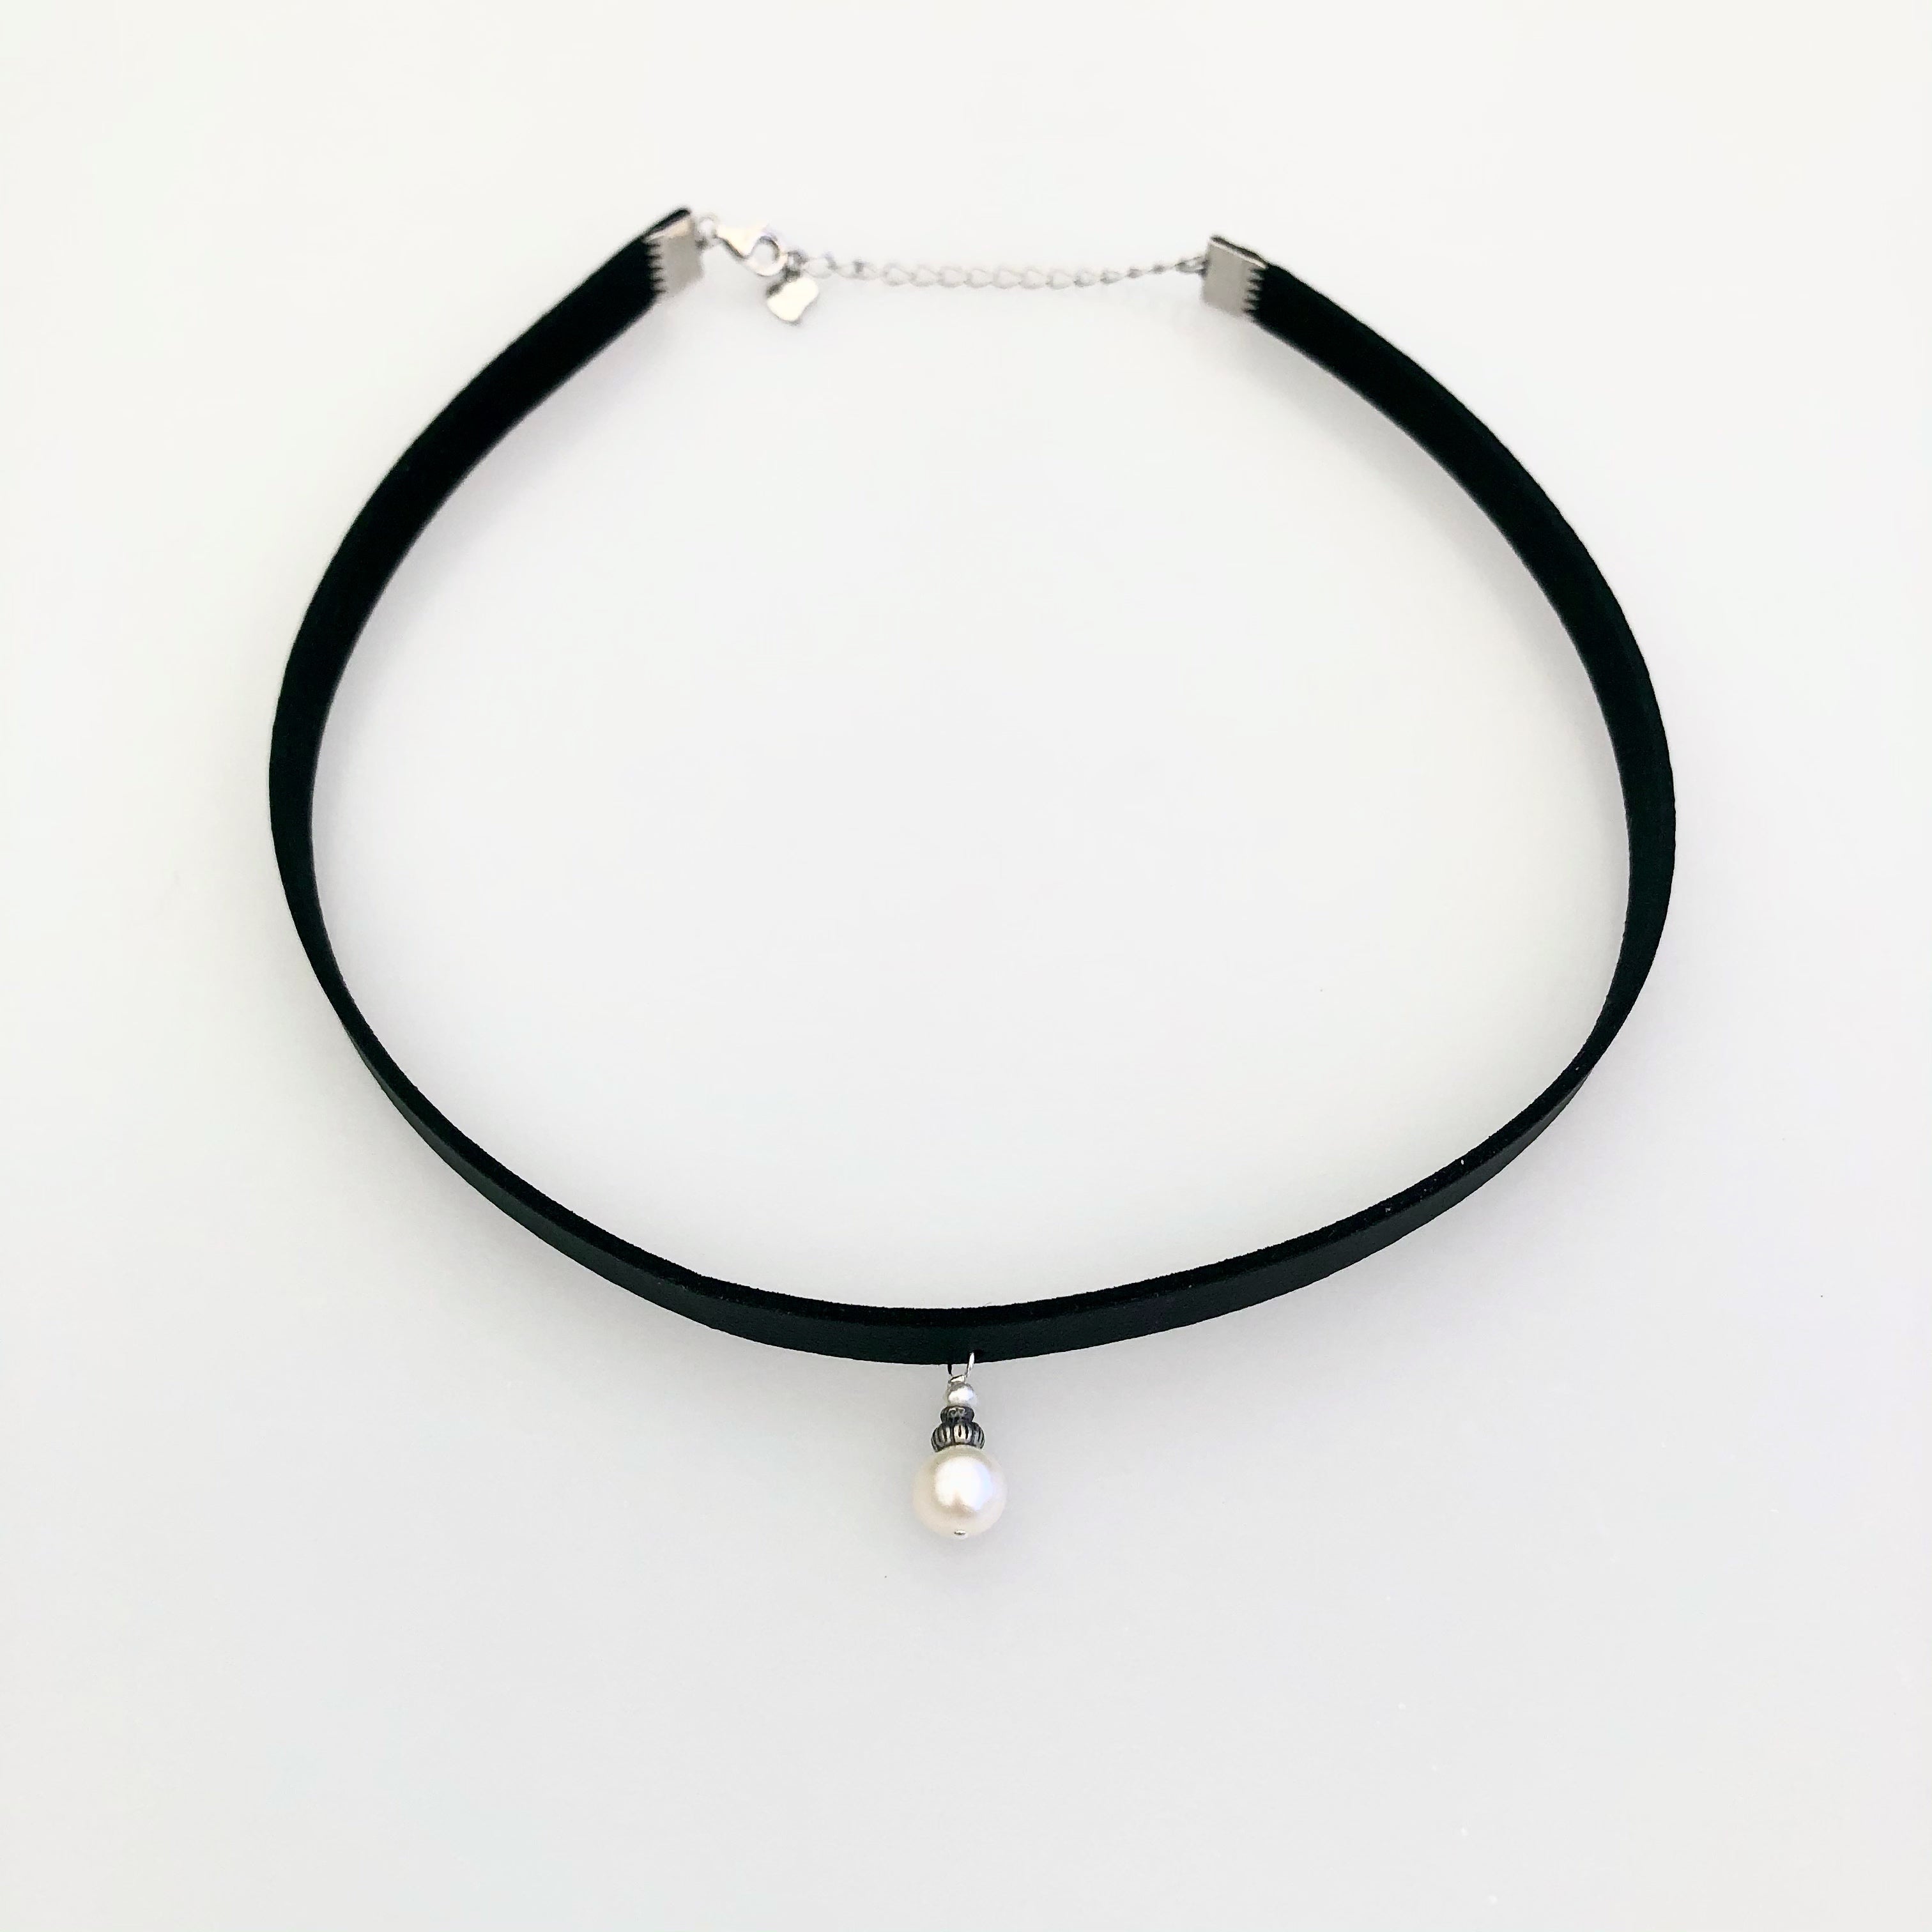 Luxury Leather Choker - Black with Triangle Pendant – Beady Boutique.com